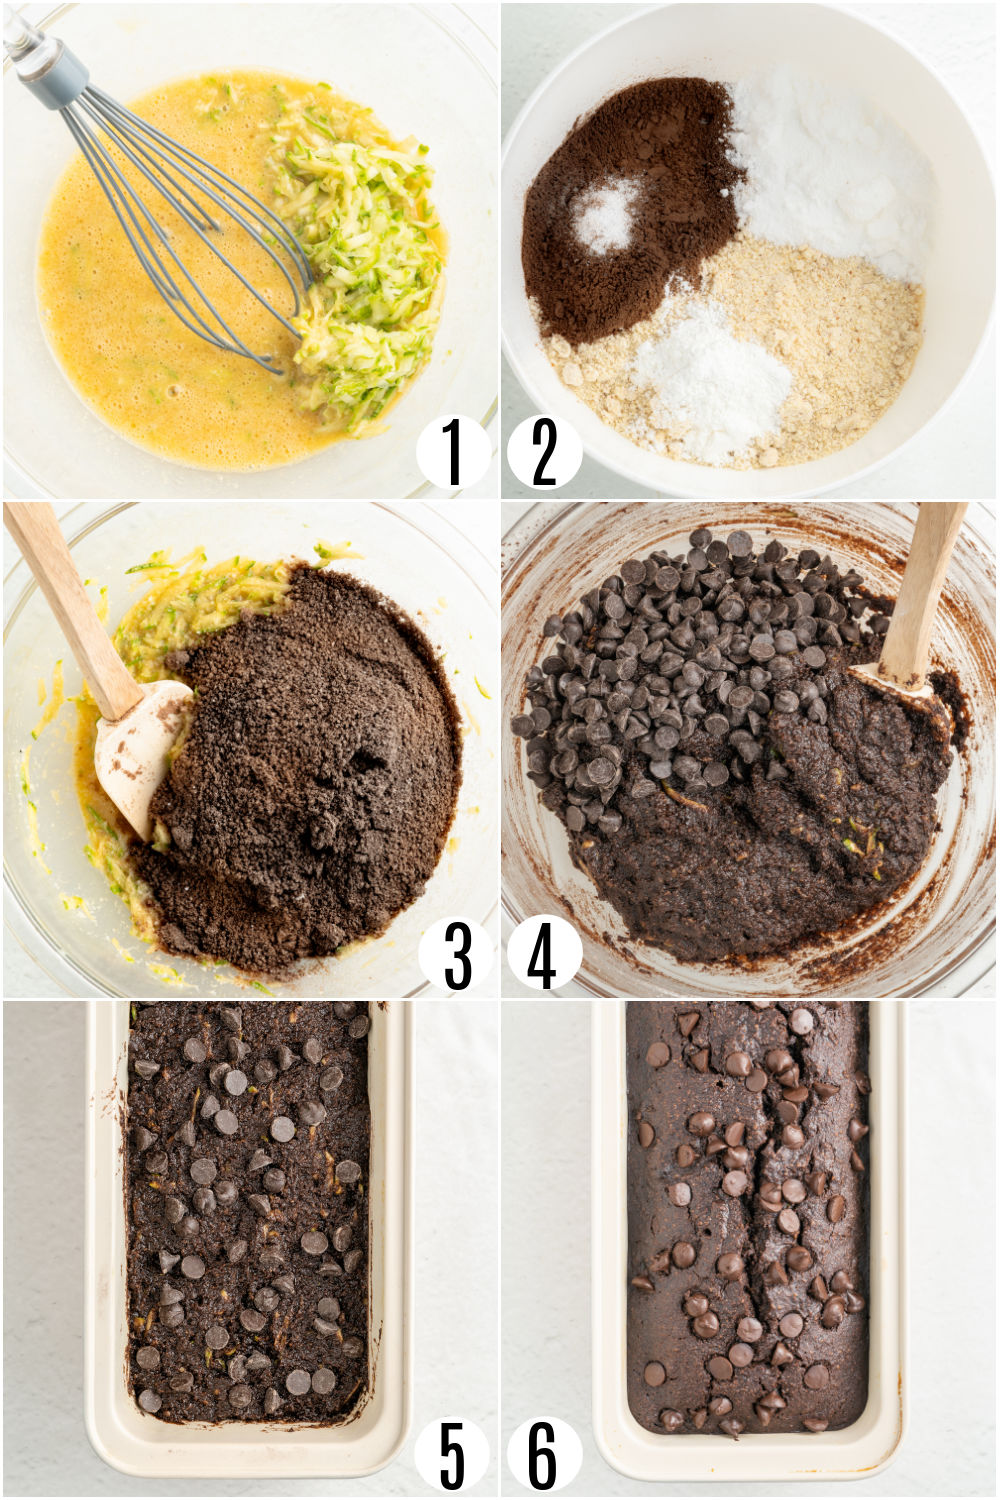 Step by step photos showing how to make sugar free zucchini bread with chocolate.